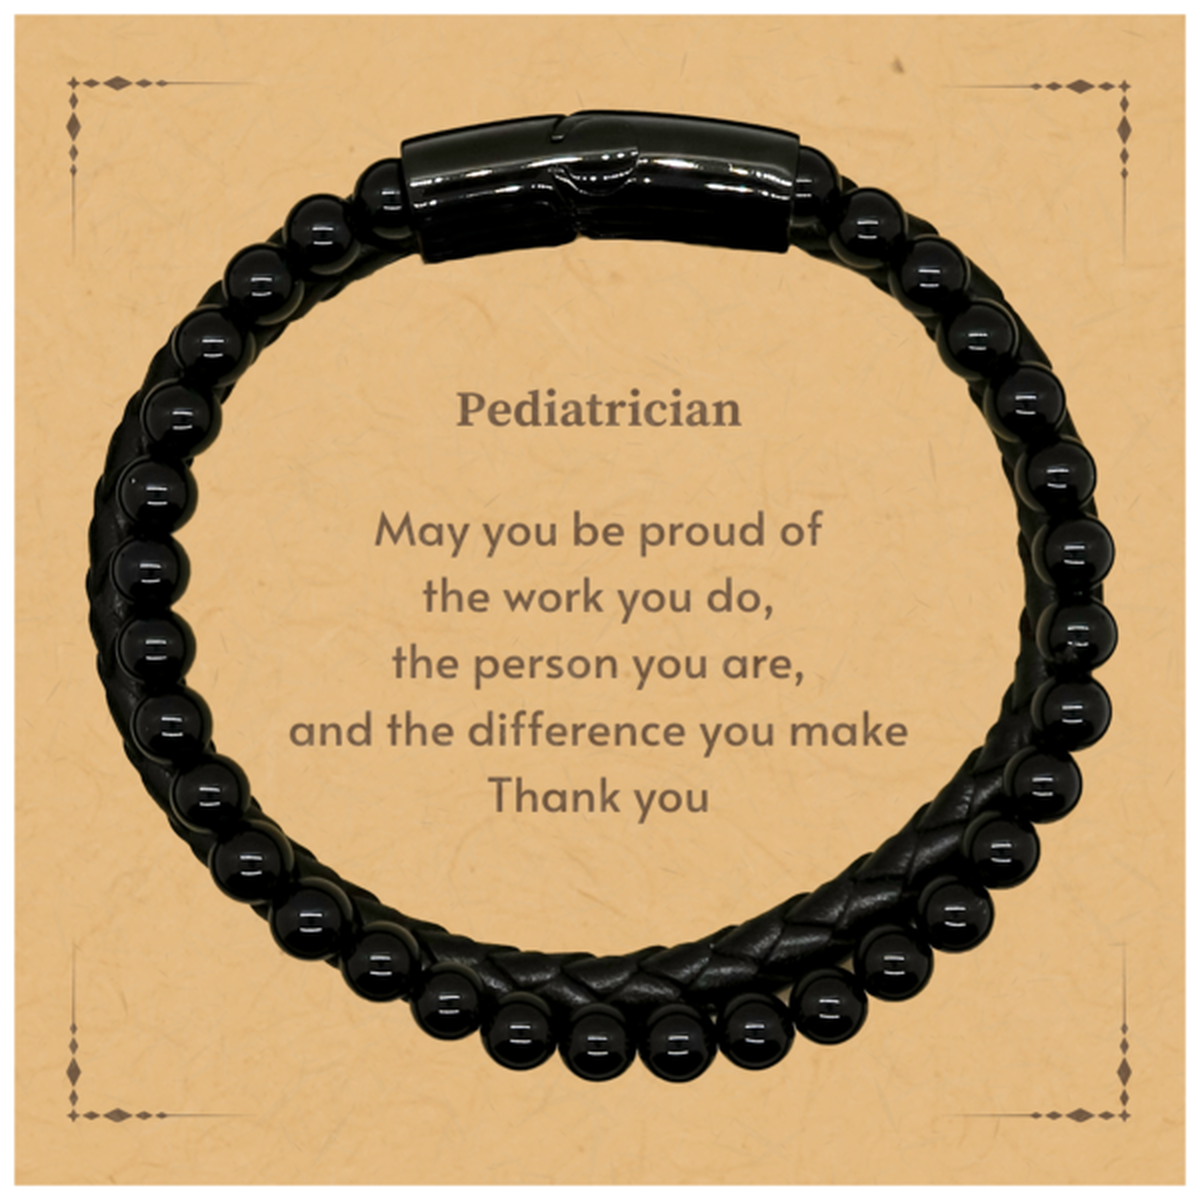 Heartwarming Stone Leather Bracelets Retirement Coworkers Gifts for Pediatrician, Pediatrician May You be proud of the work you do, the person you are Gifts for Boss Men Women Friends